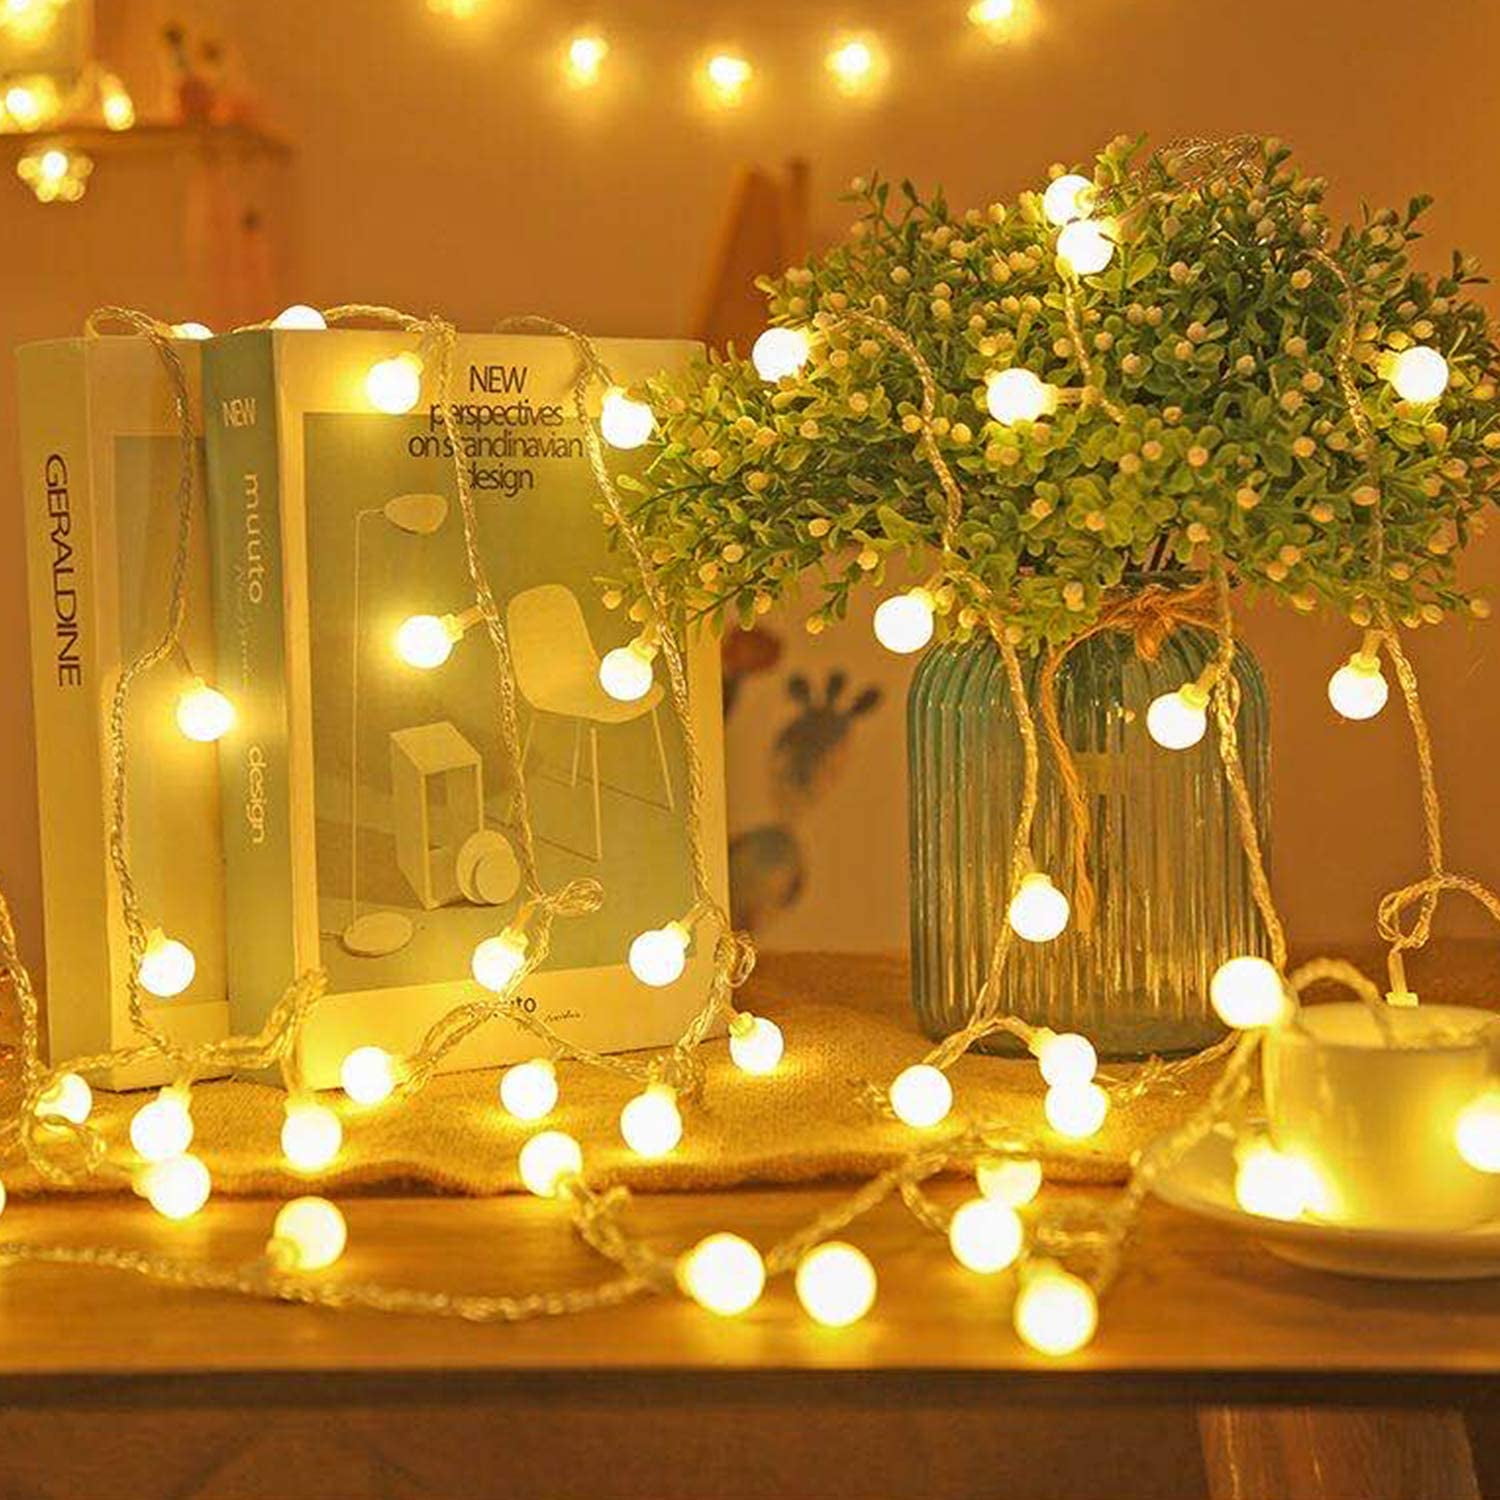 100/200 LED String Fairy Lights Wedding Party Indoor Home New Years Decorations 